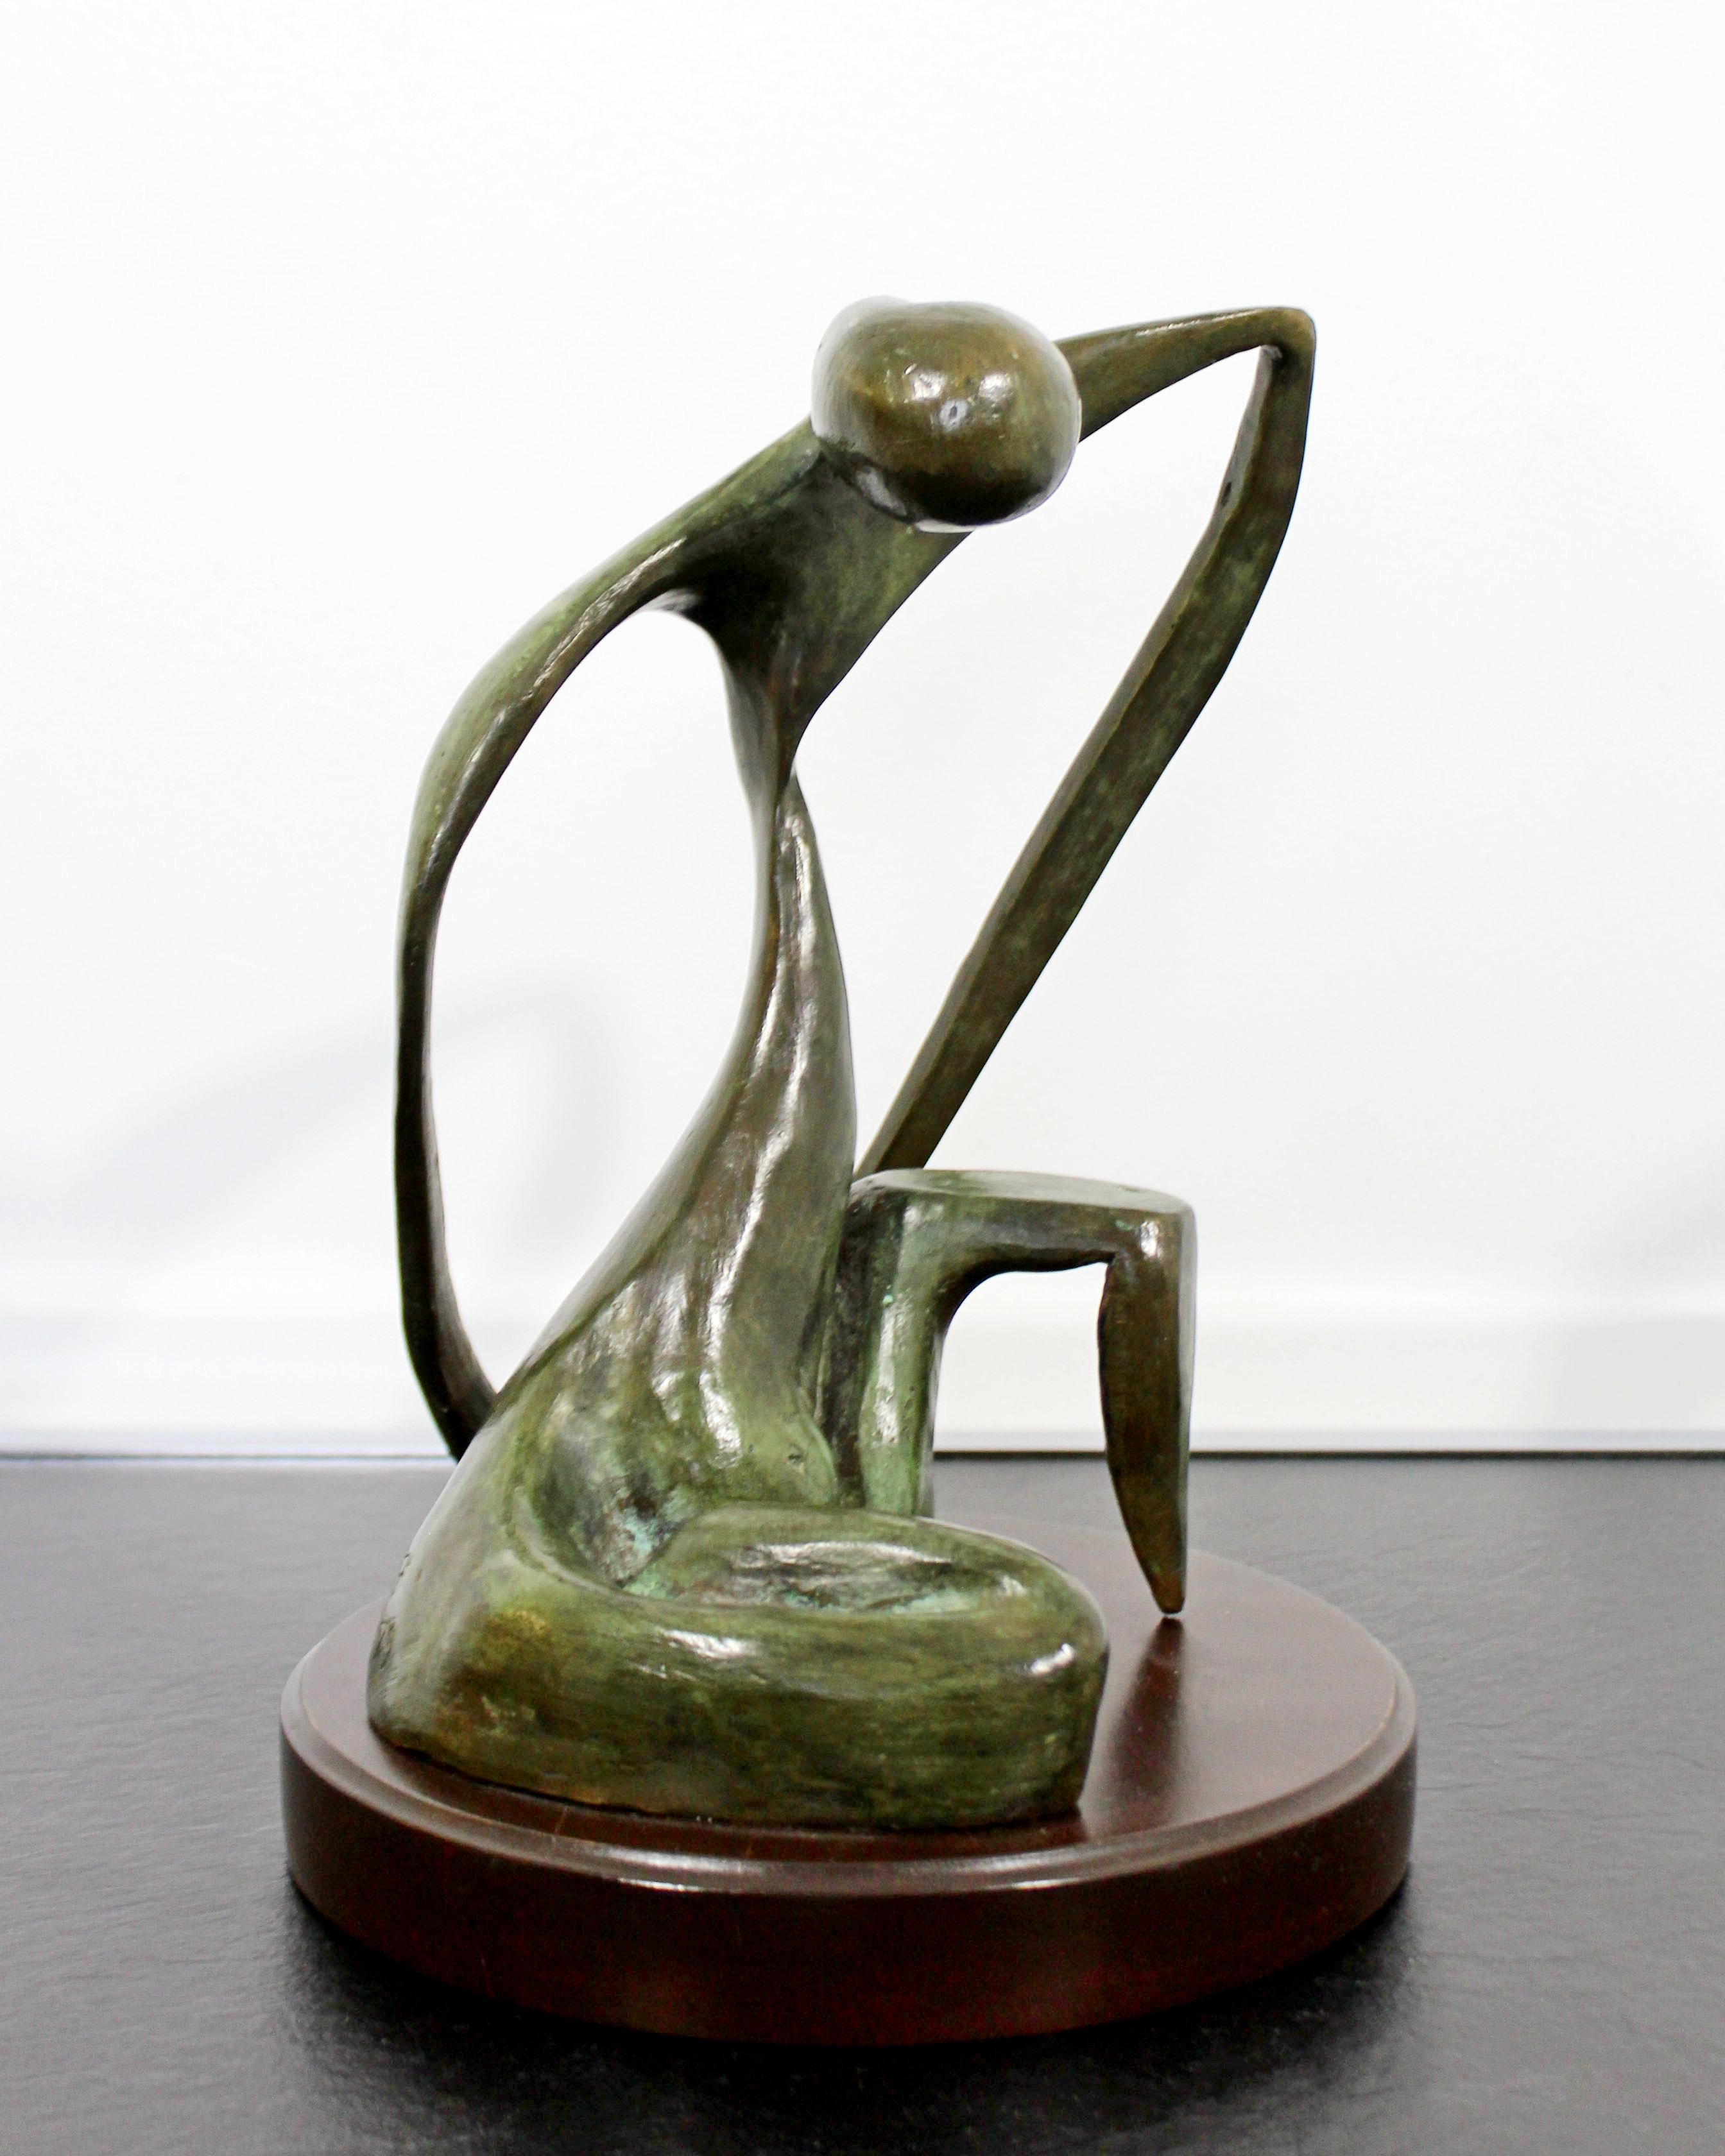 For your consideration is a terrific, bronze table sculpture, 